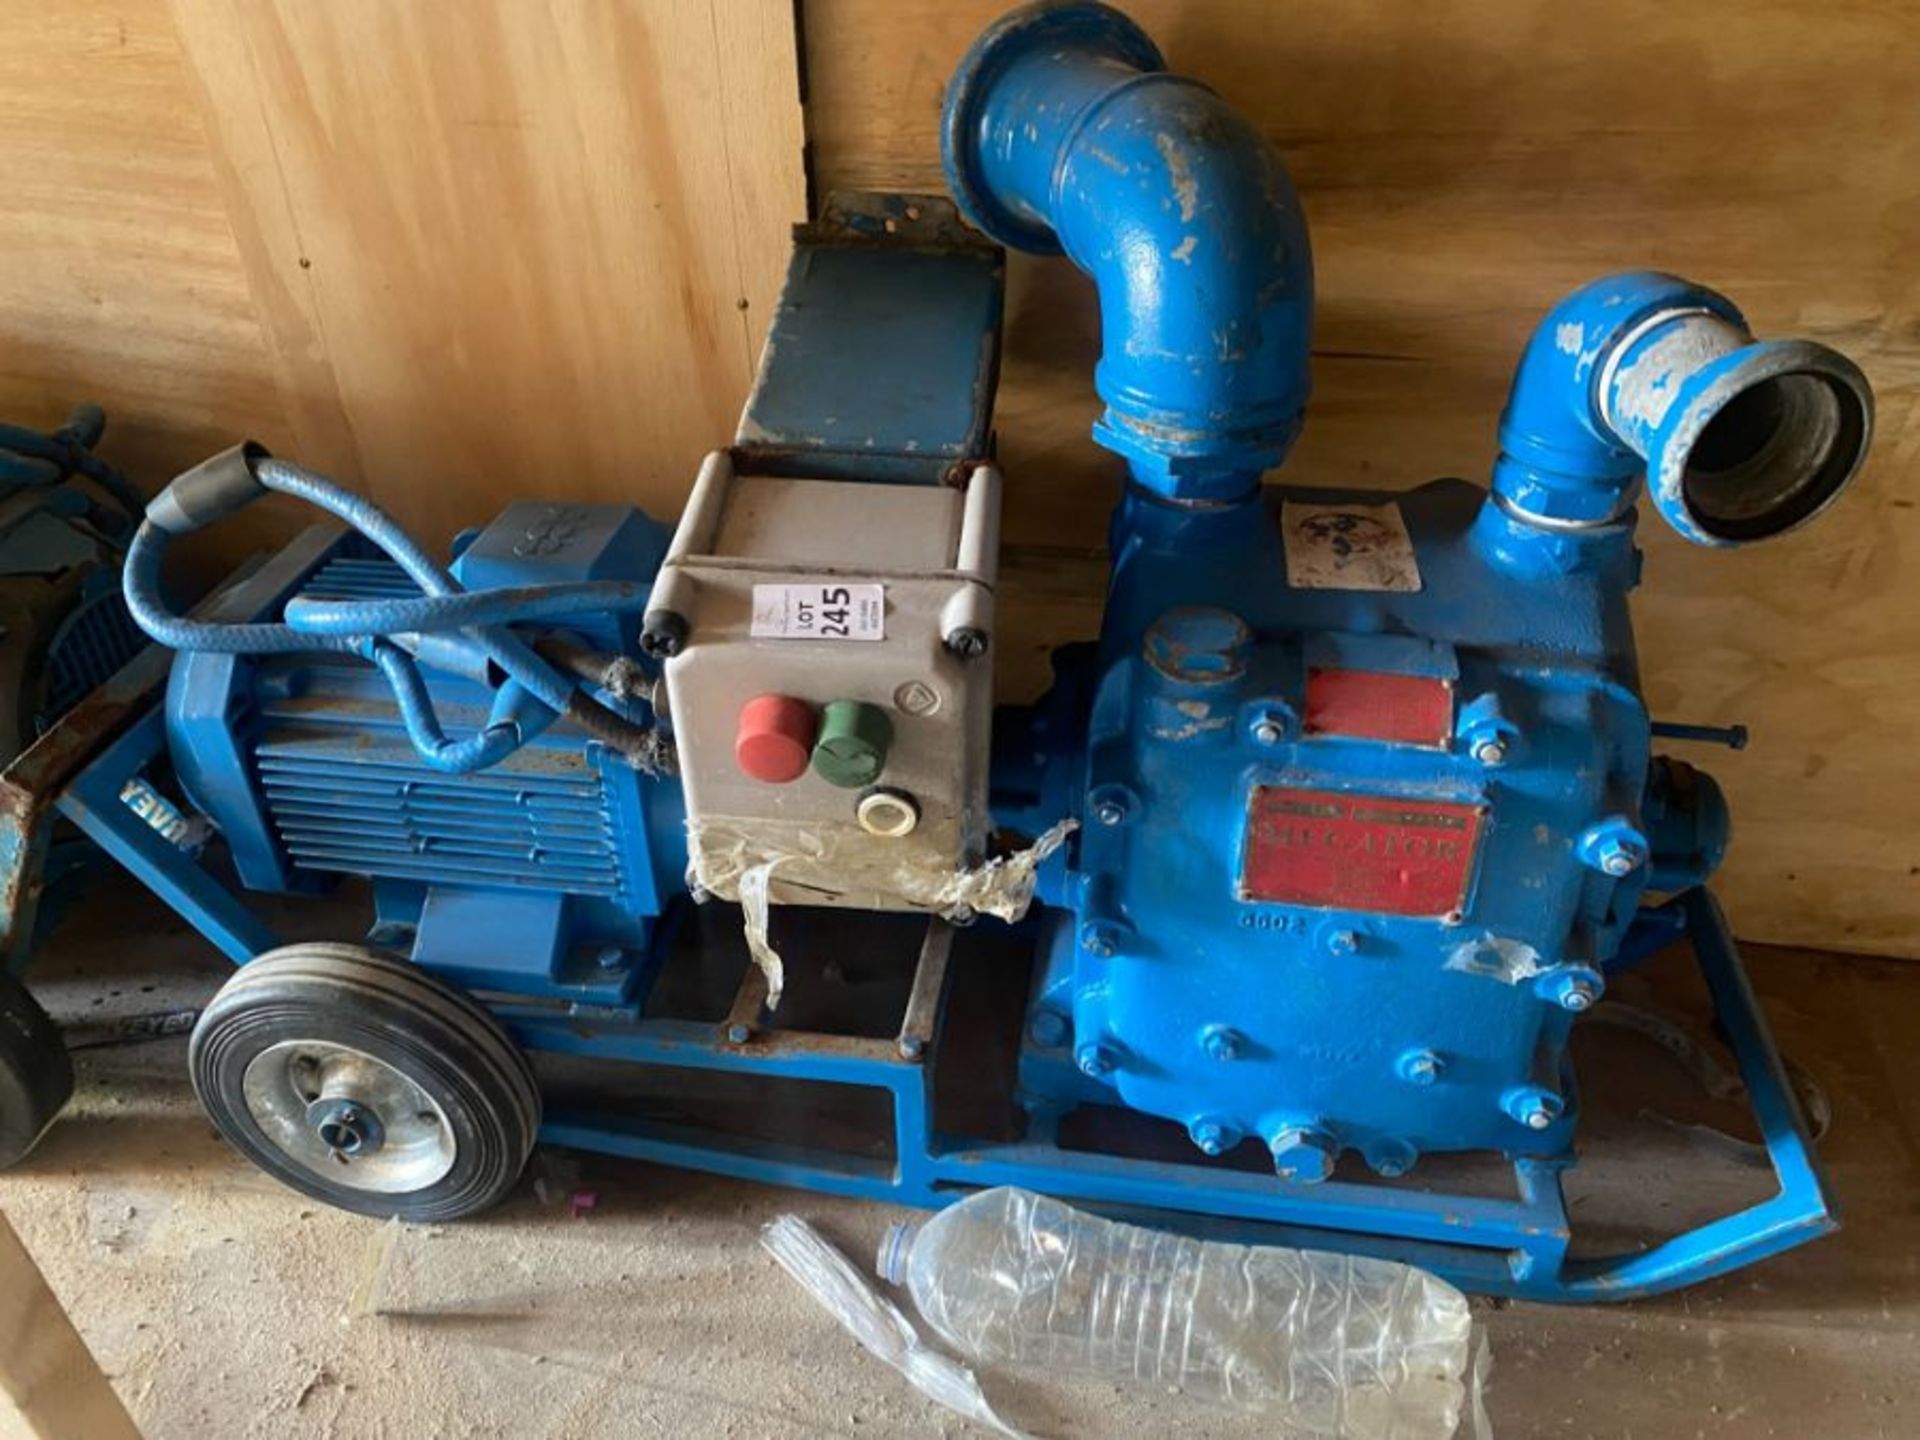 3-PHASE HIGH PRESSURE WATER PUMP ON TROLLEY (HAMMER VAT ON THIS ITEM)